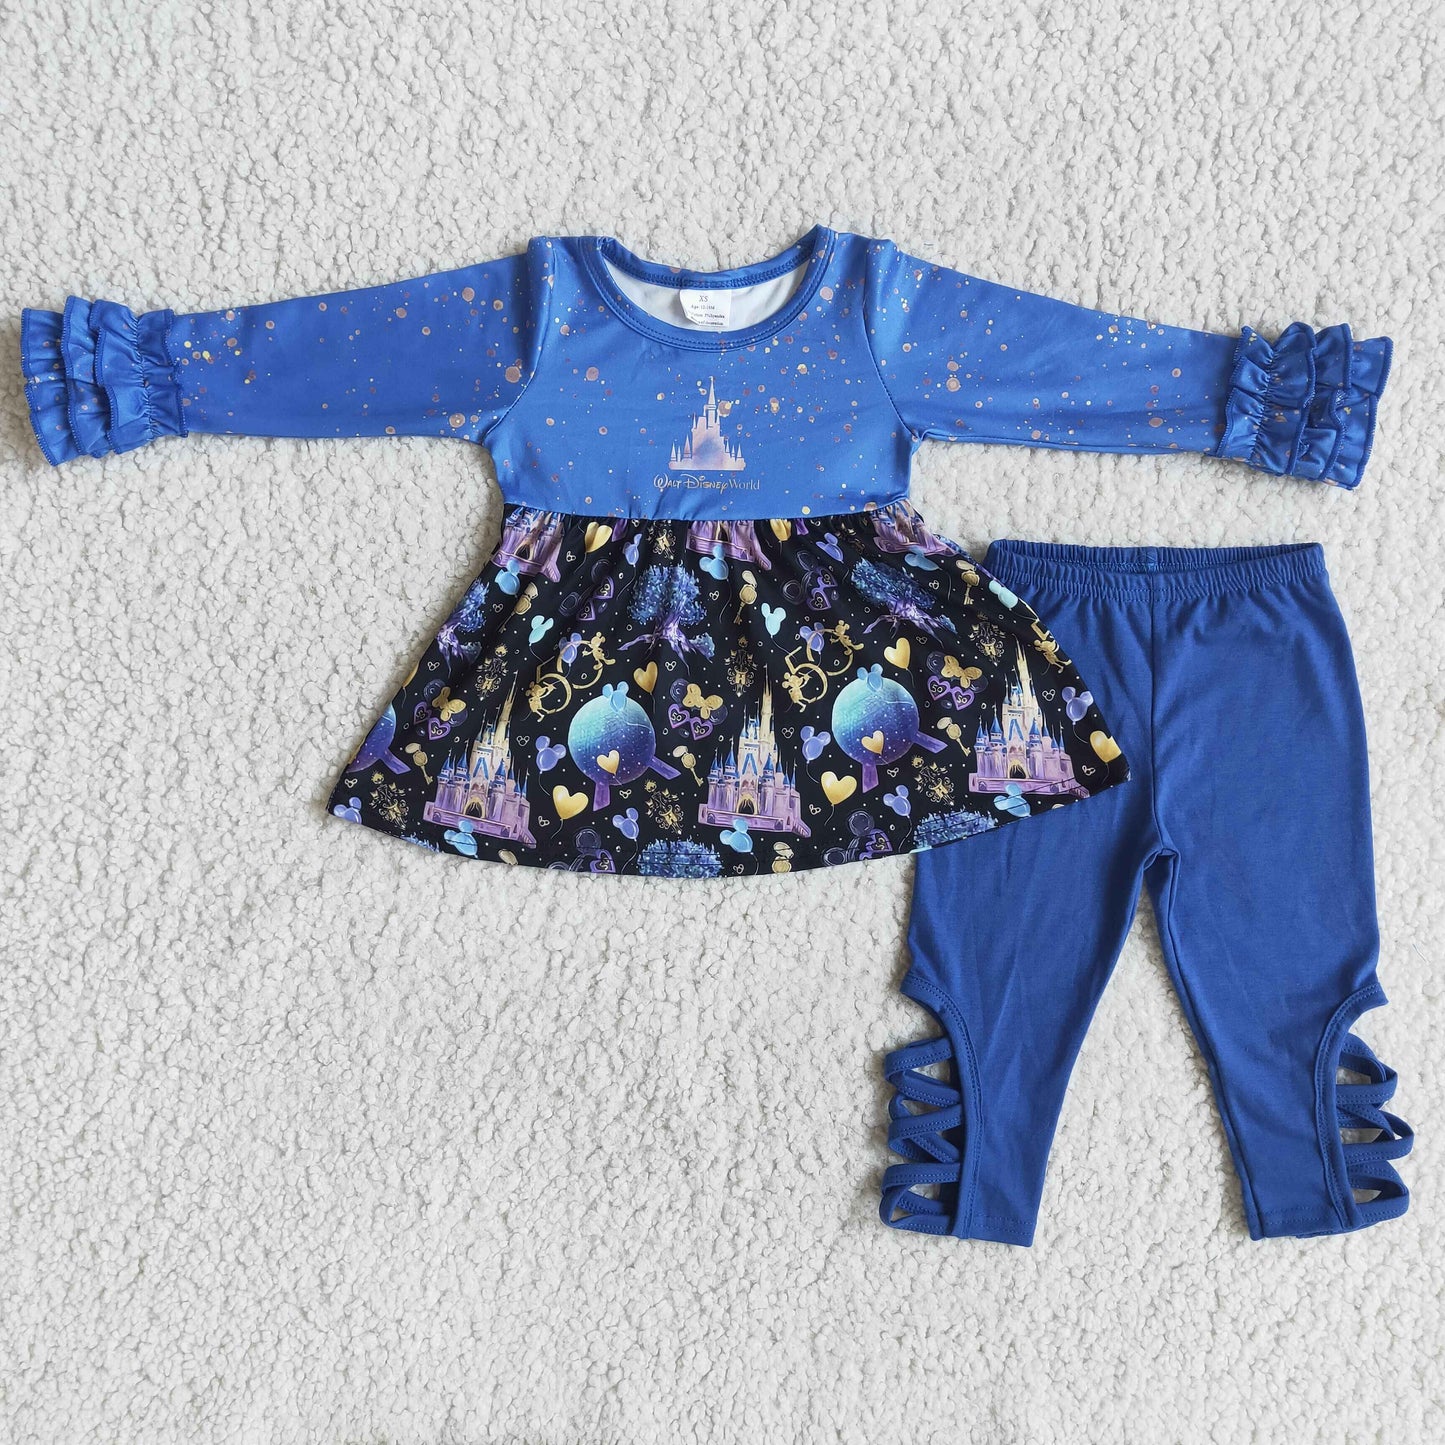 Castle legging baby girls outfits sets